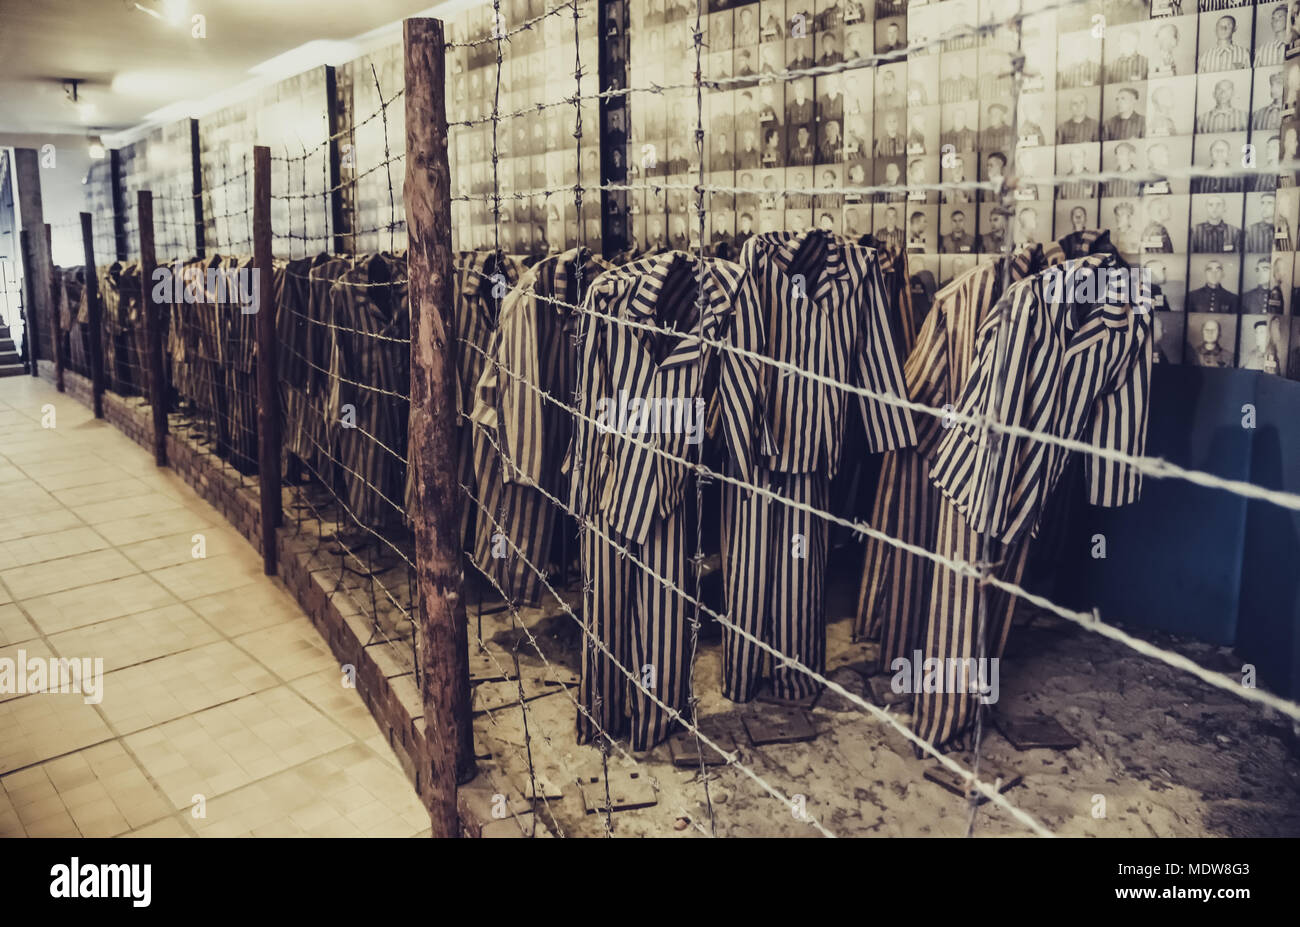 Oswiecim / Poland - 02.15.2018: Auschwitz Museum Exhibition with prisoners' clothes with stripes behind a barbed wire fence. Stock Photo